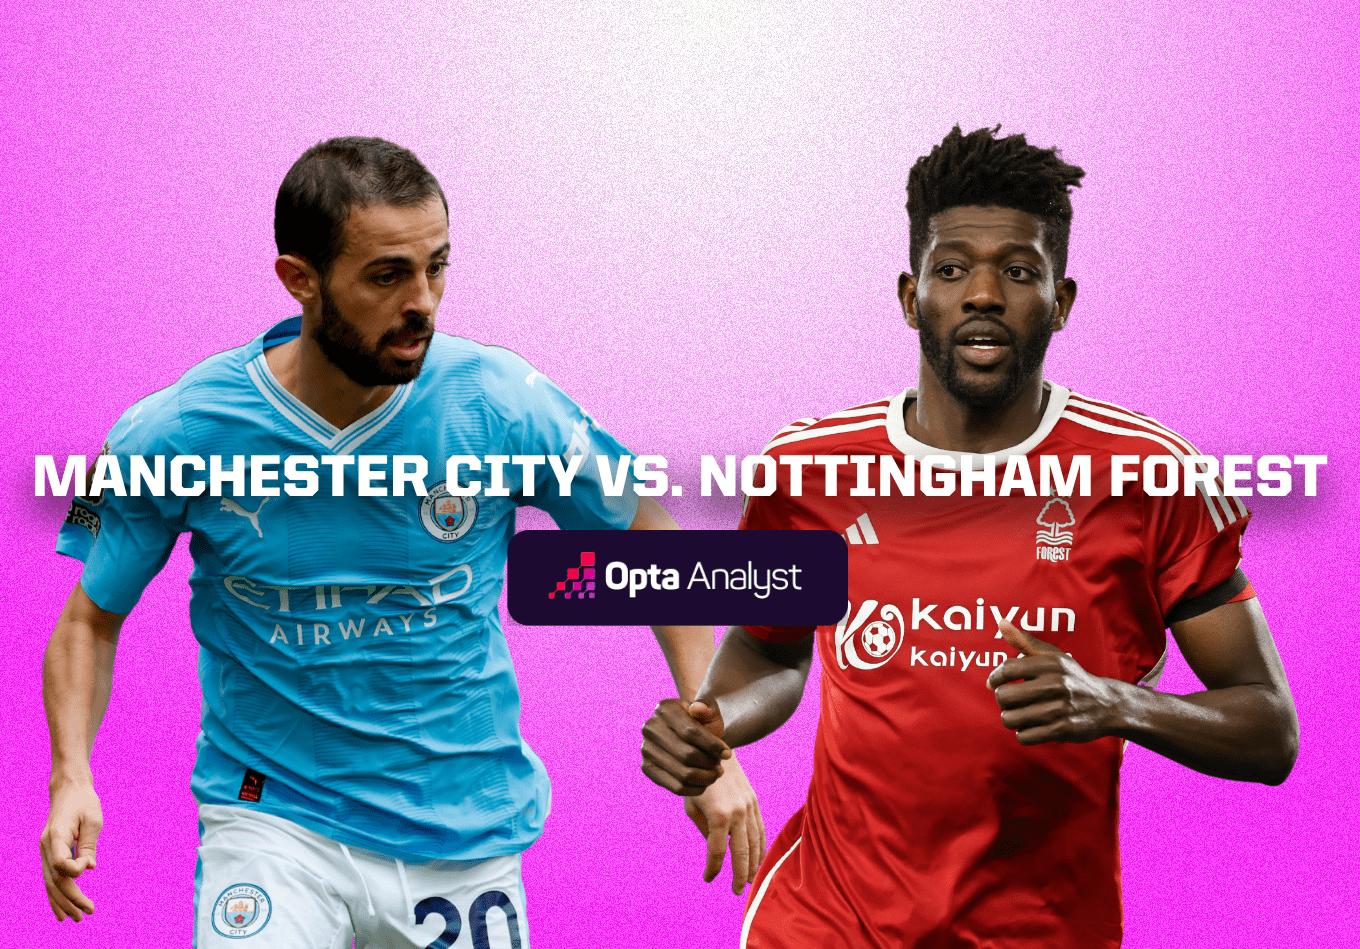 Manchester City vs Nottingham Forest: Prediction and Preview